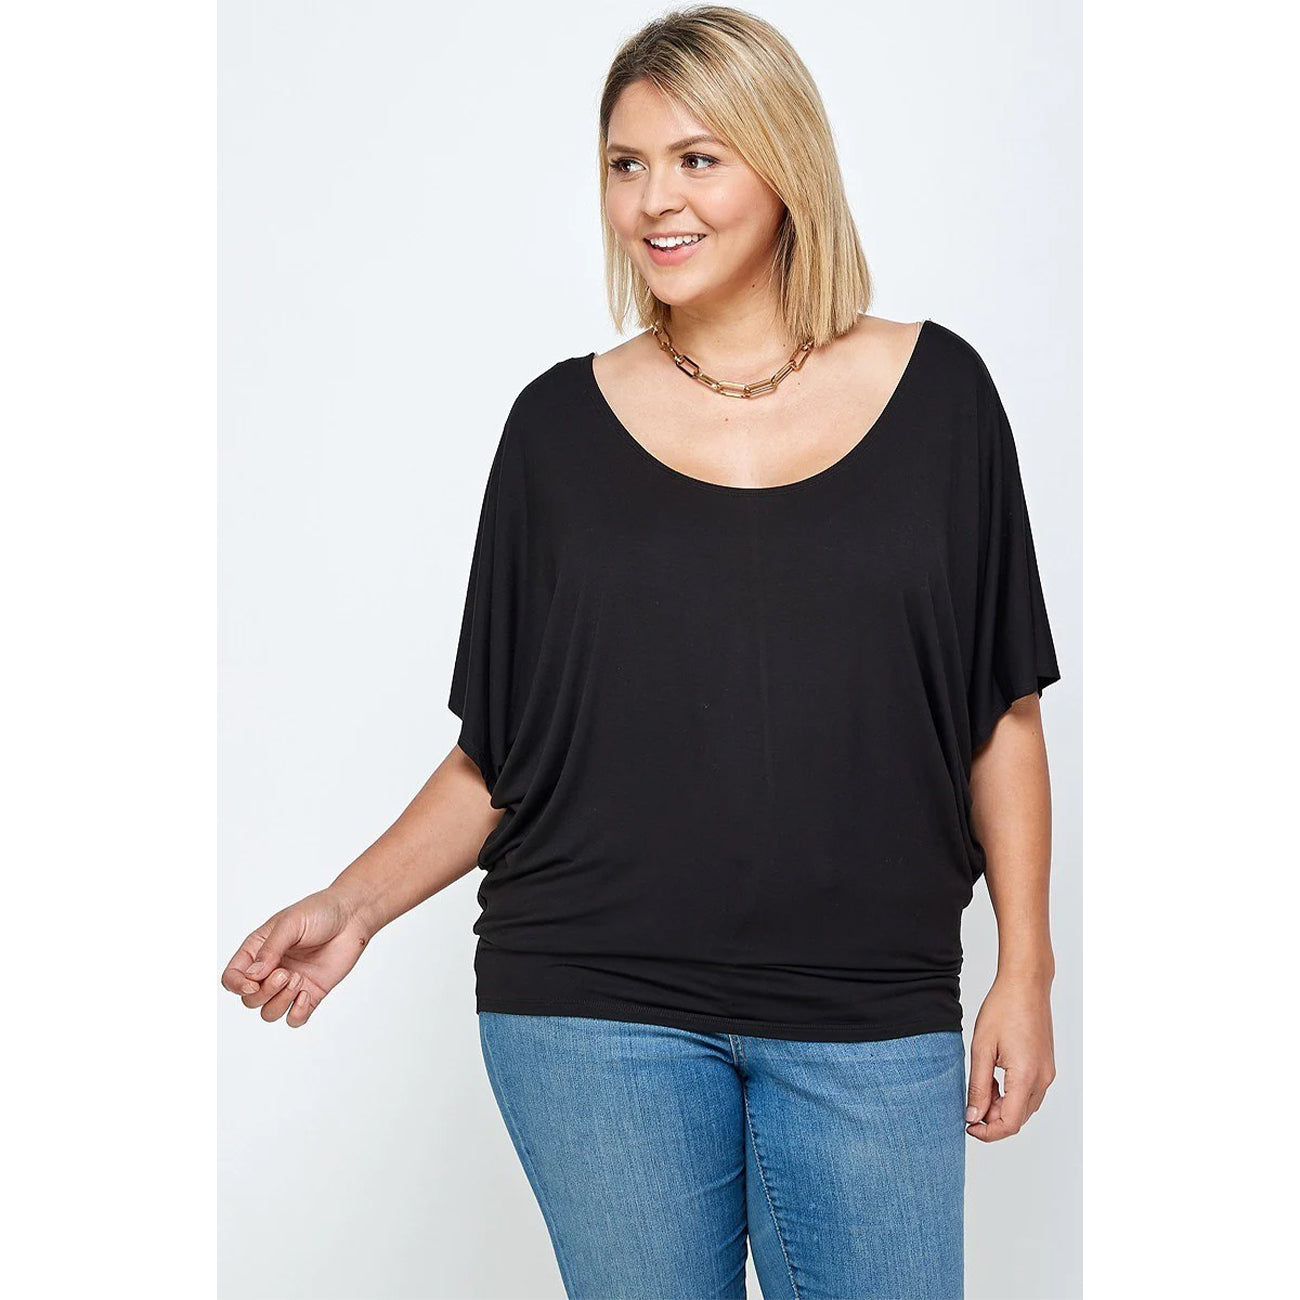 Solid Knit Women's Top With A Flowy Silhouette